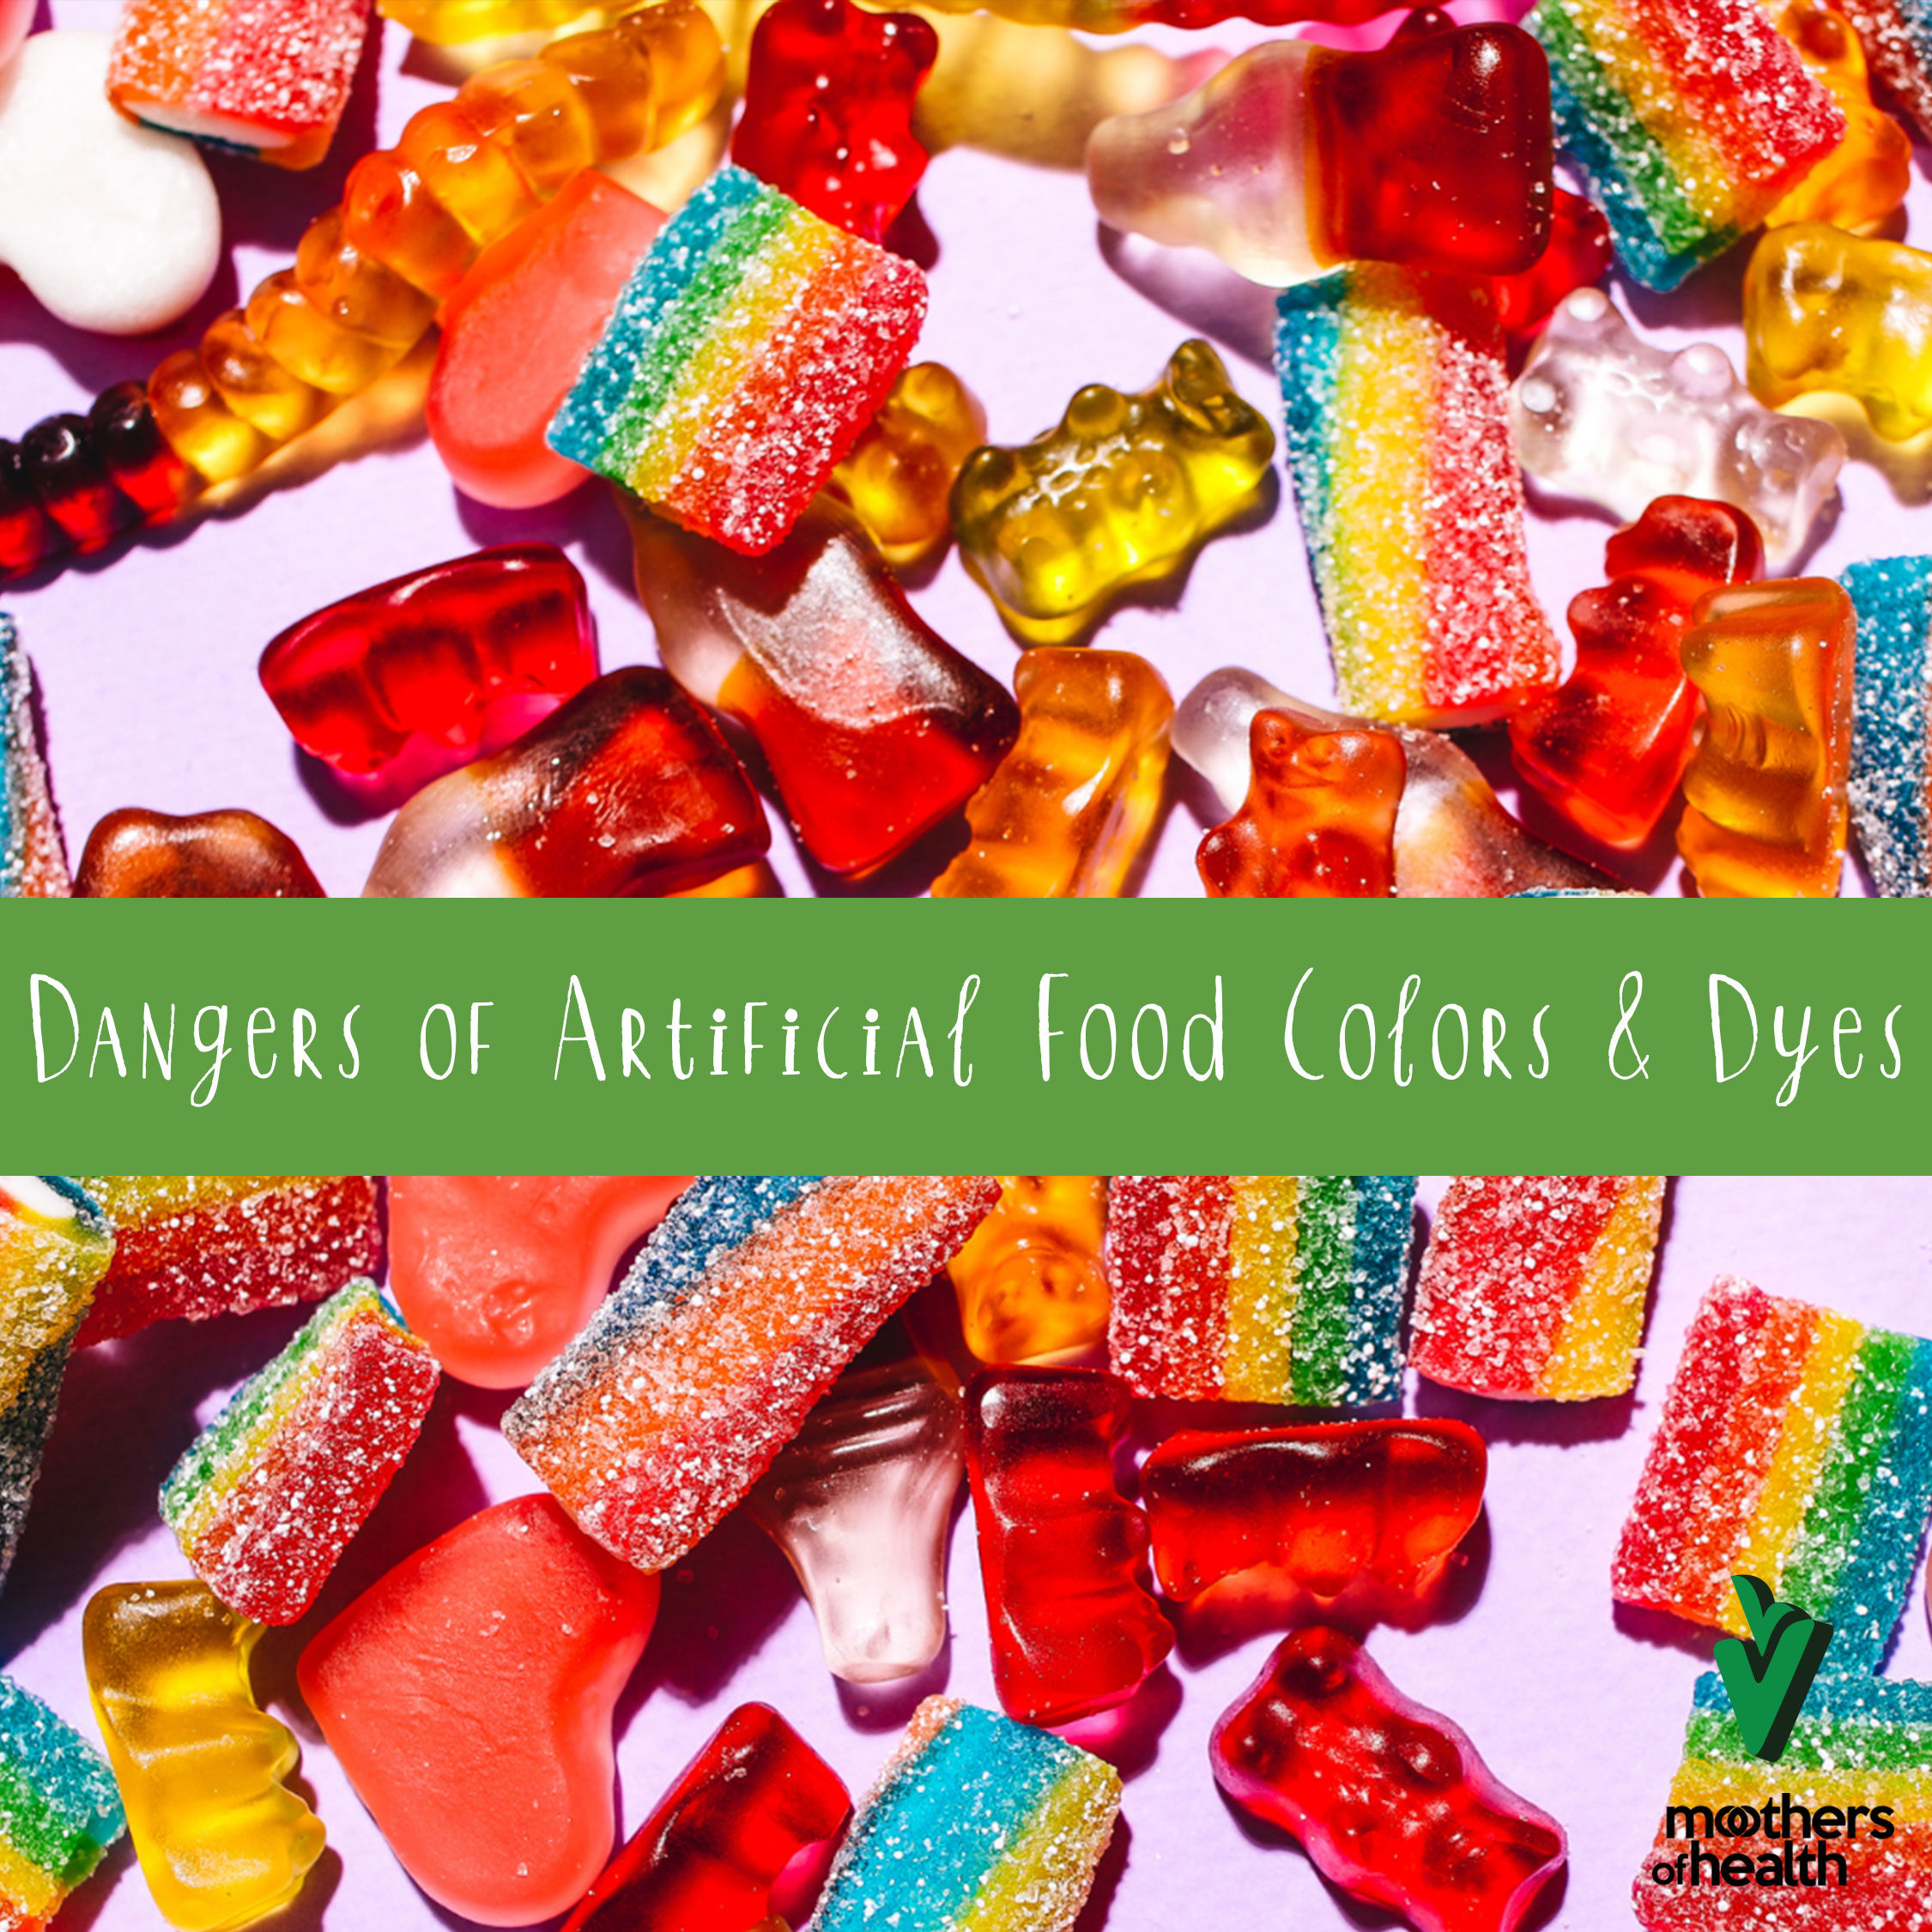 Could Artificial Food Dyes Harm Kids?